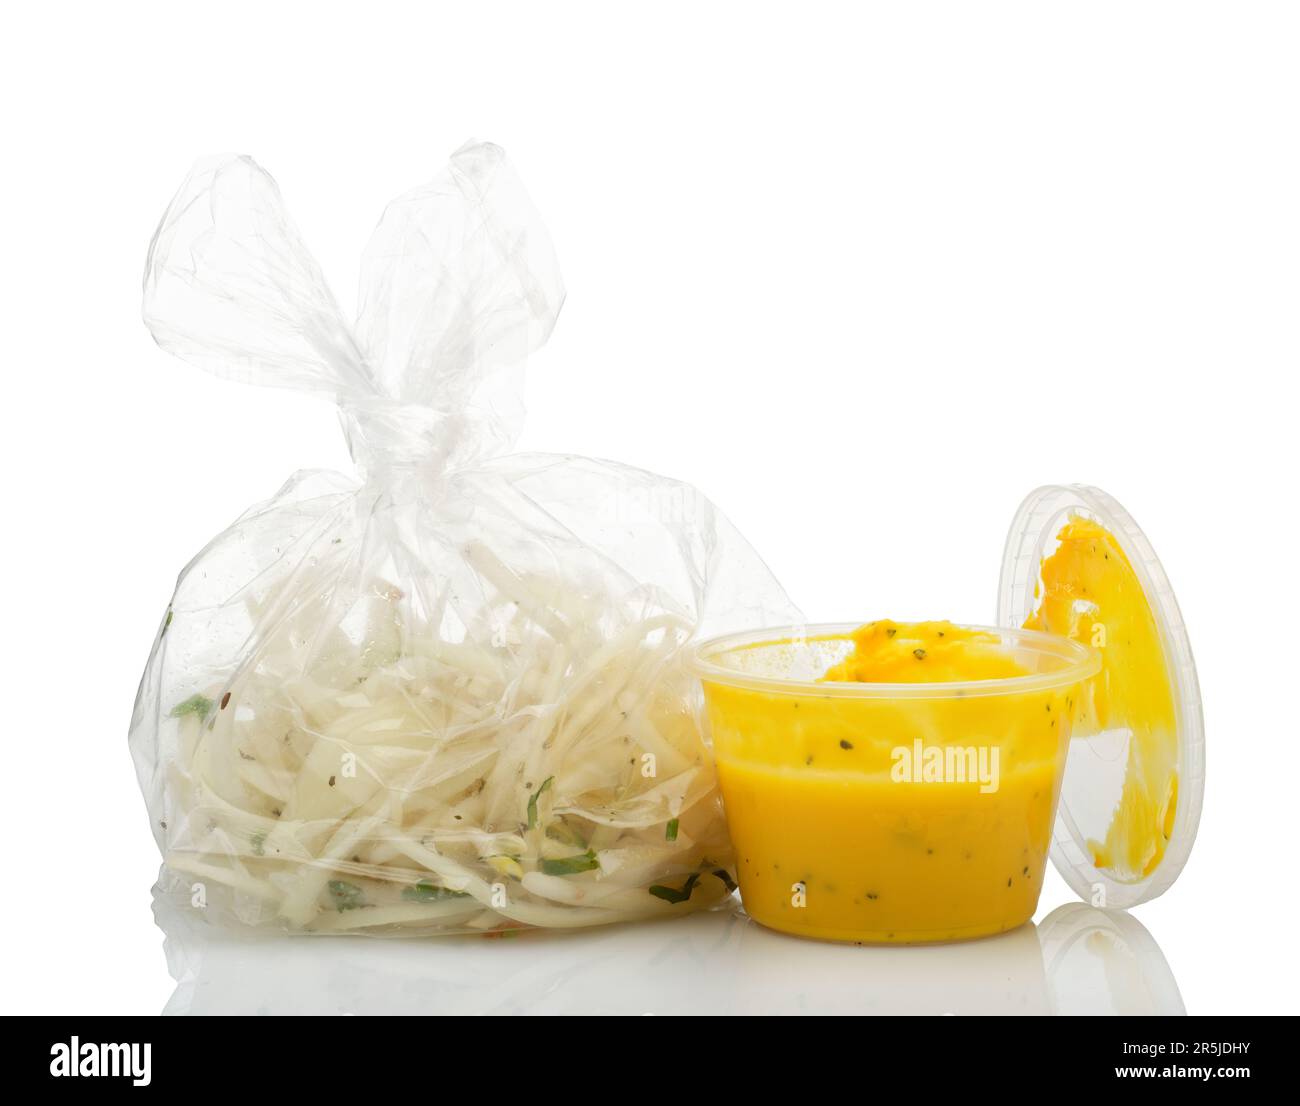 Items added (but not always eaten) in an Indian takeaway dinner. Chopped onions in a plastic bag and yellow dipping sauce. Stock Photo